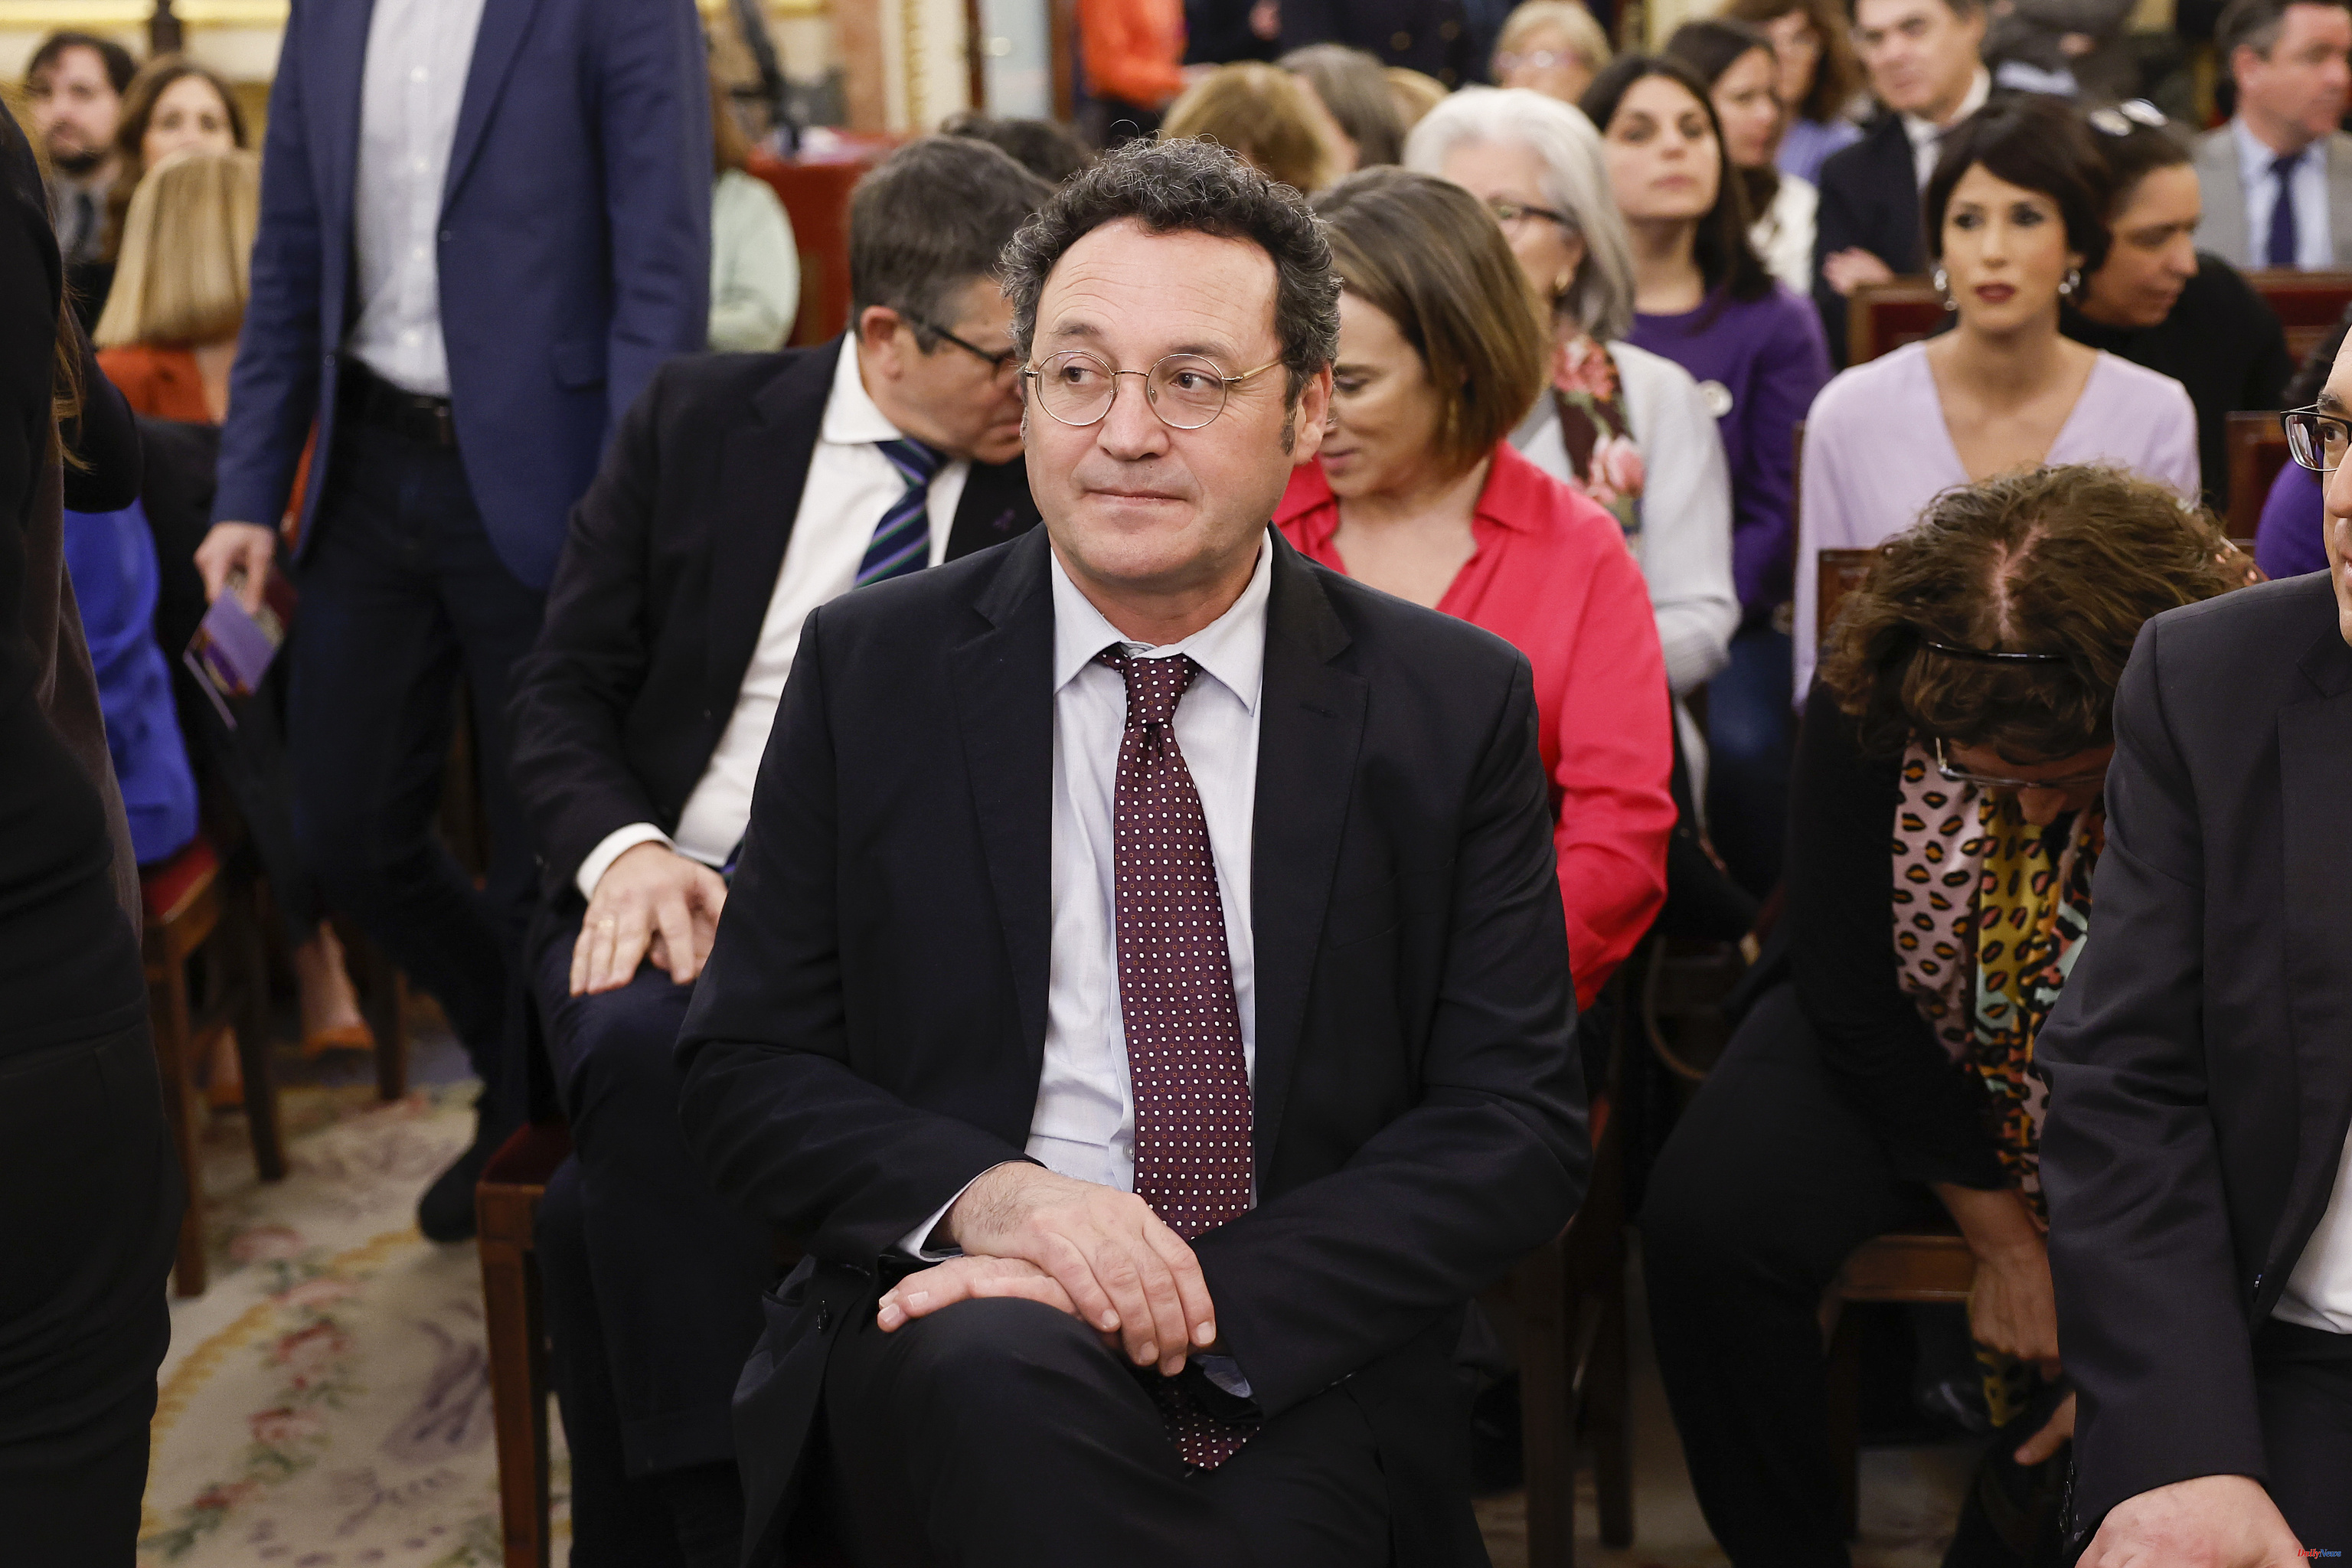 Spain The Attorney General's Office persecuted with "mere conjectures and suspicions" for months the prosecutor who stood up in the Miguel Ángel Blanco case